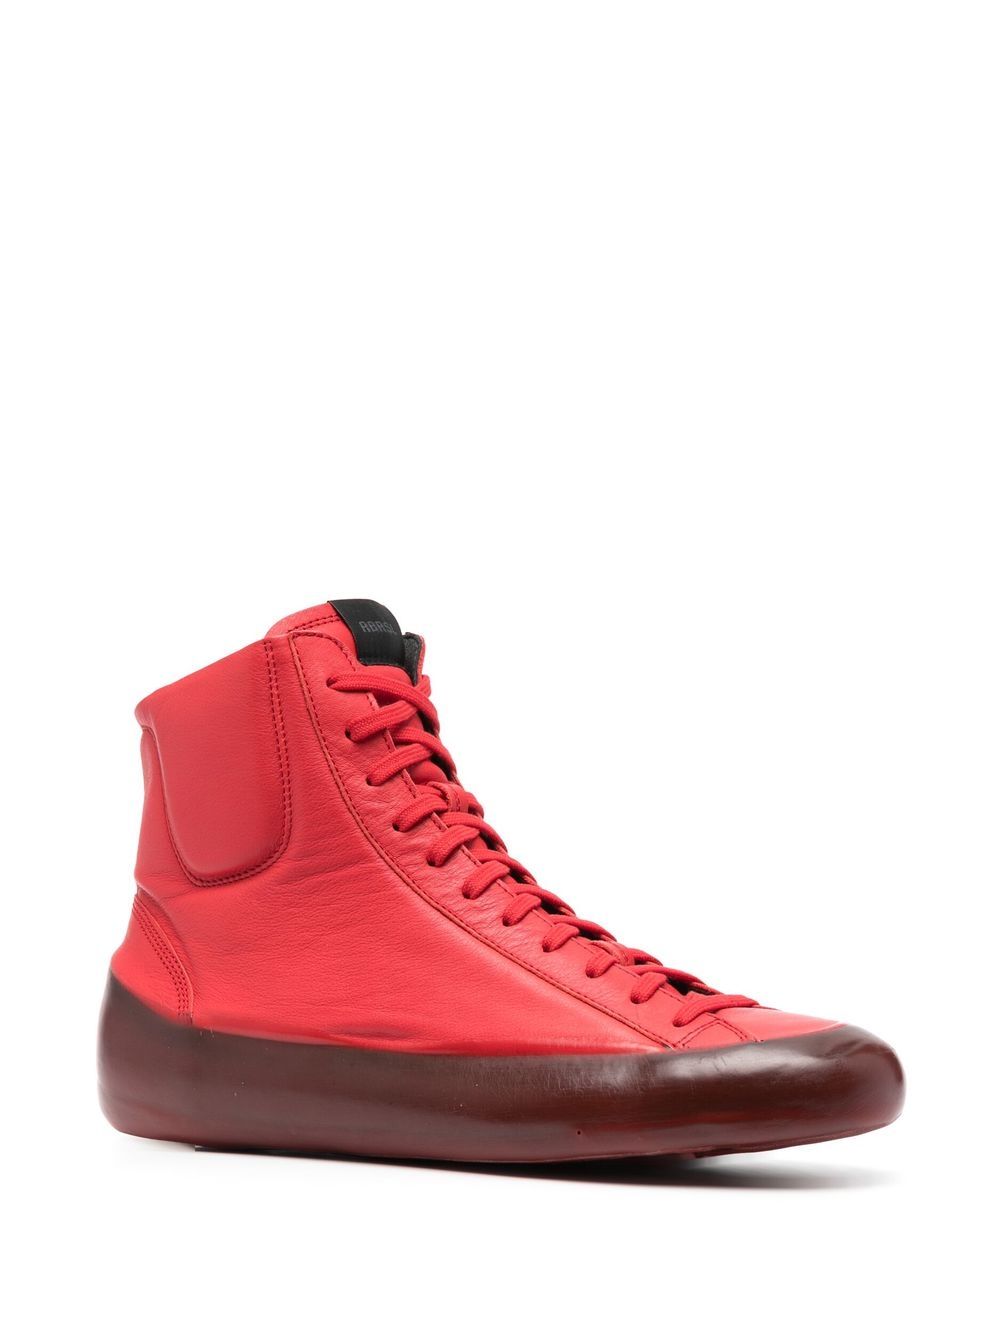 RBRSL RUBBER SOUL High-top sneakers - Rood